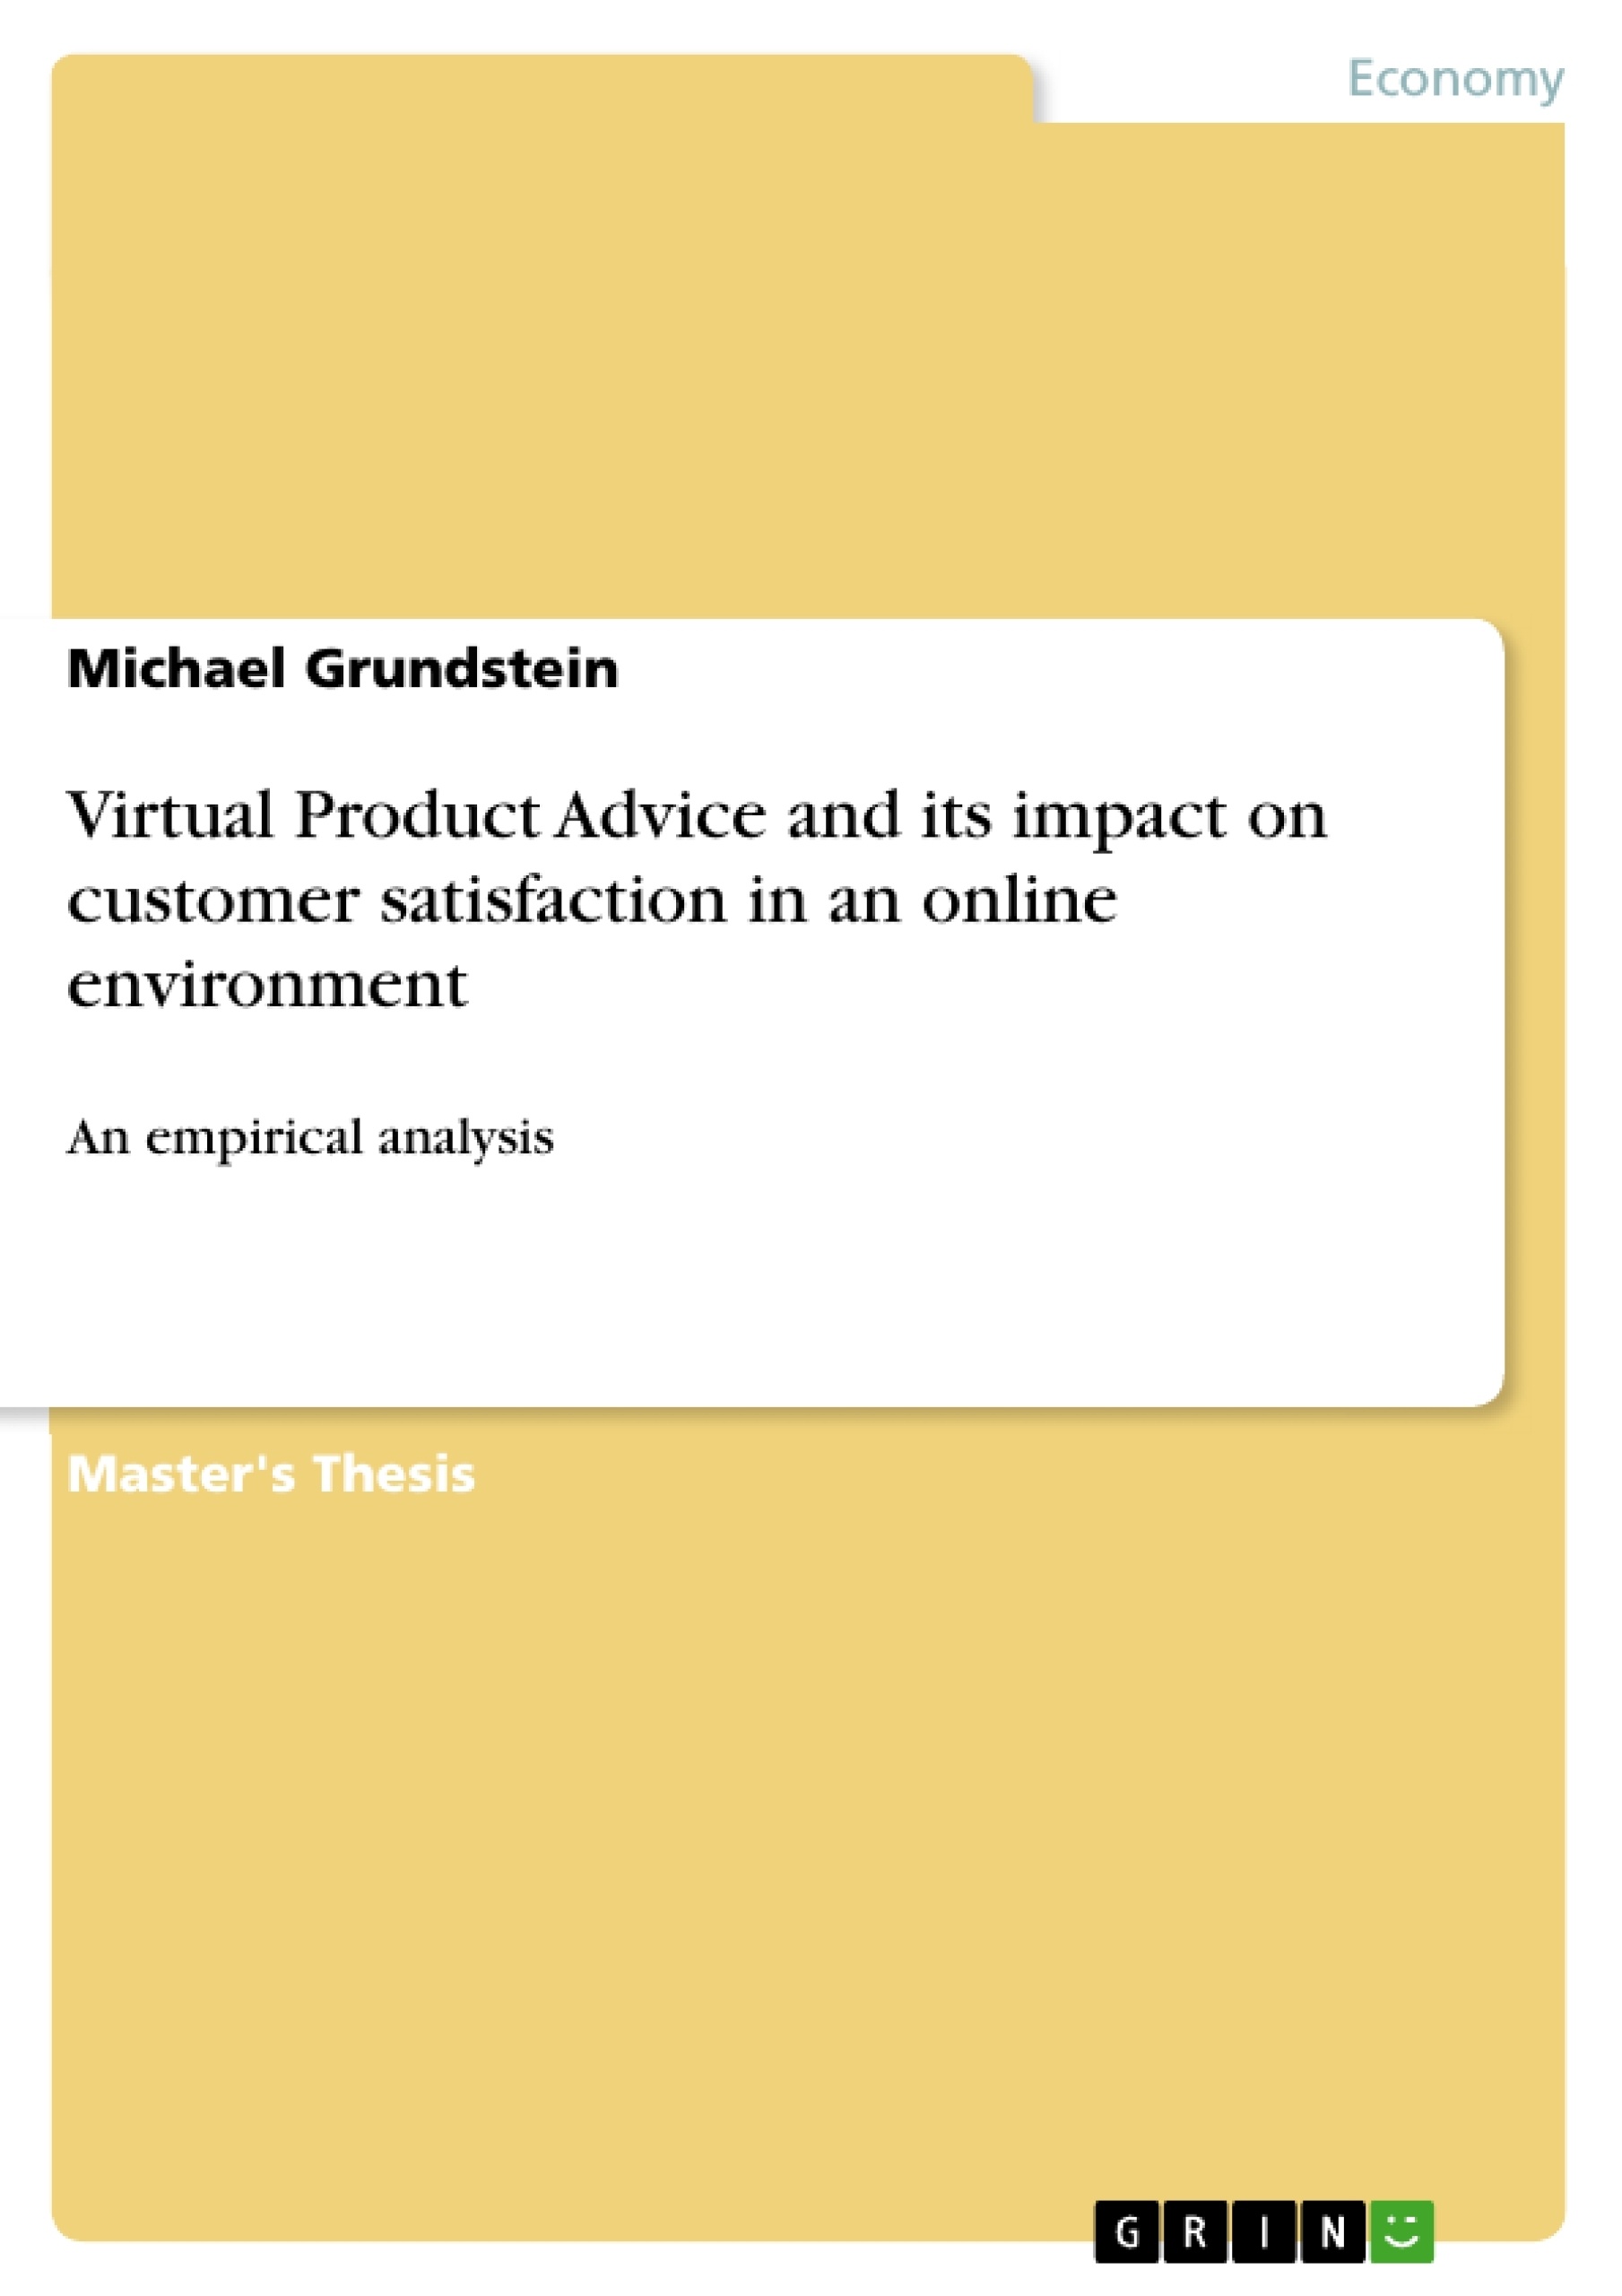 Title: Virtual Product Advice and its impact on customer satisfaction in an online environment